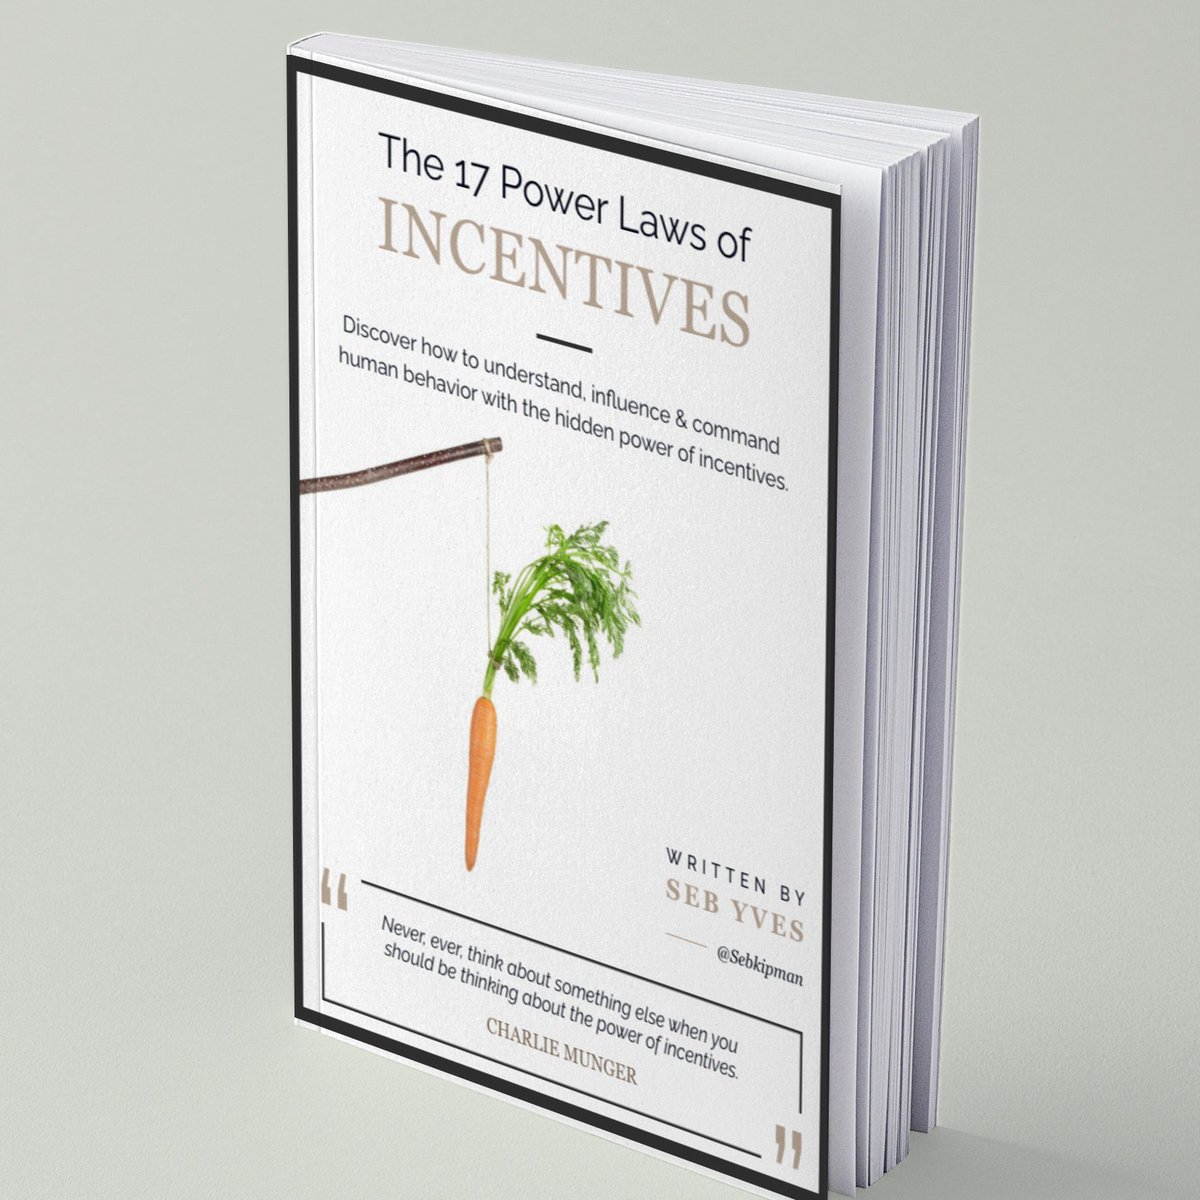 Incentives are THE best way to get anything you want in life and business by influencing human behavior. I've spent 100s of hours studying incentives so you don't have to. Now I've turned this research into the book '17 Power Laws of Incentives'. Want it? - Drop me a…